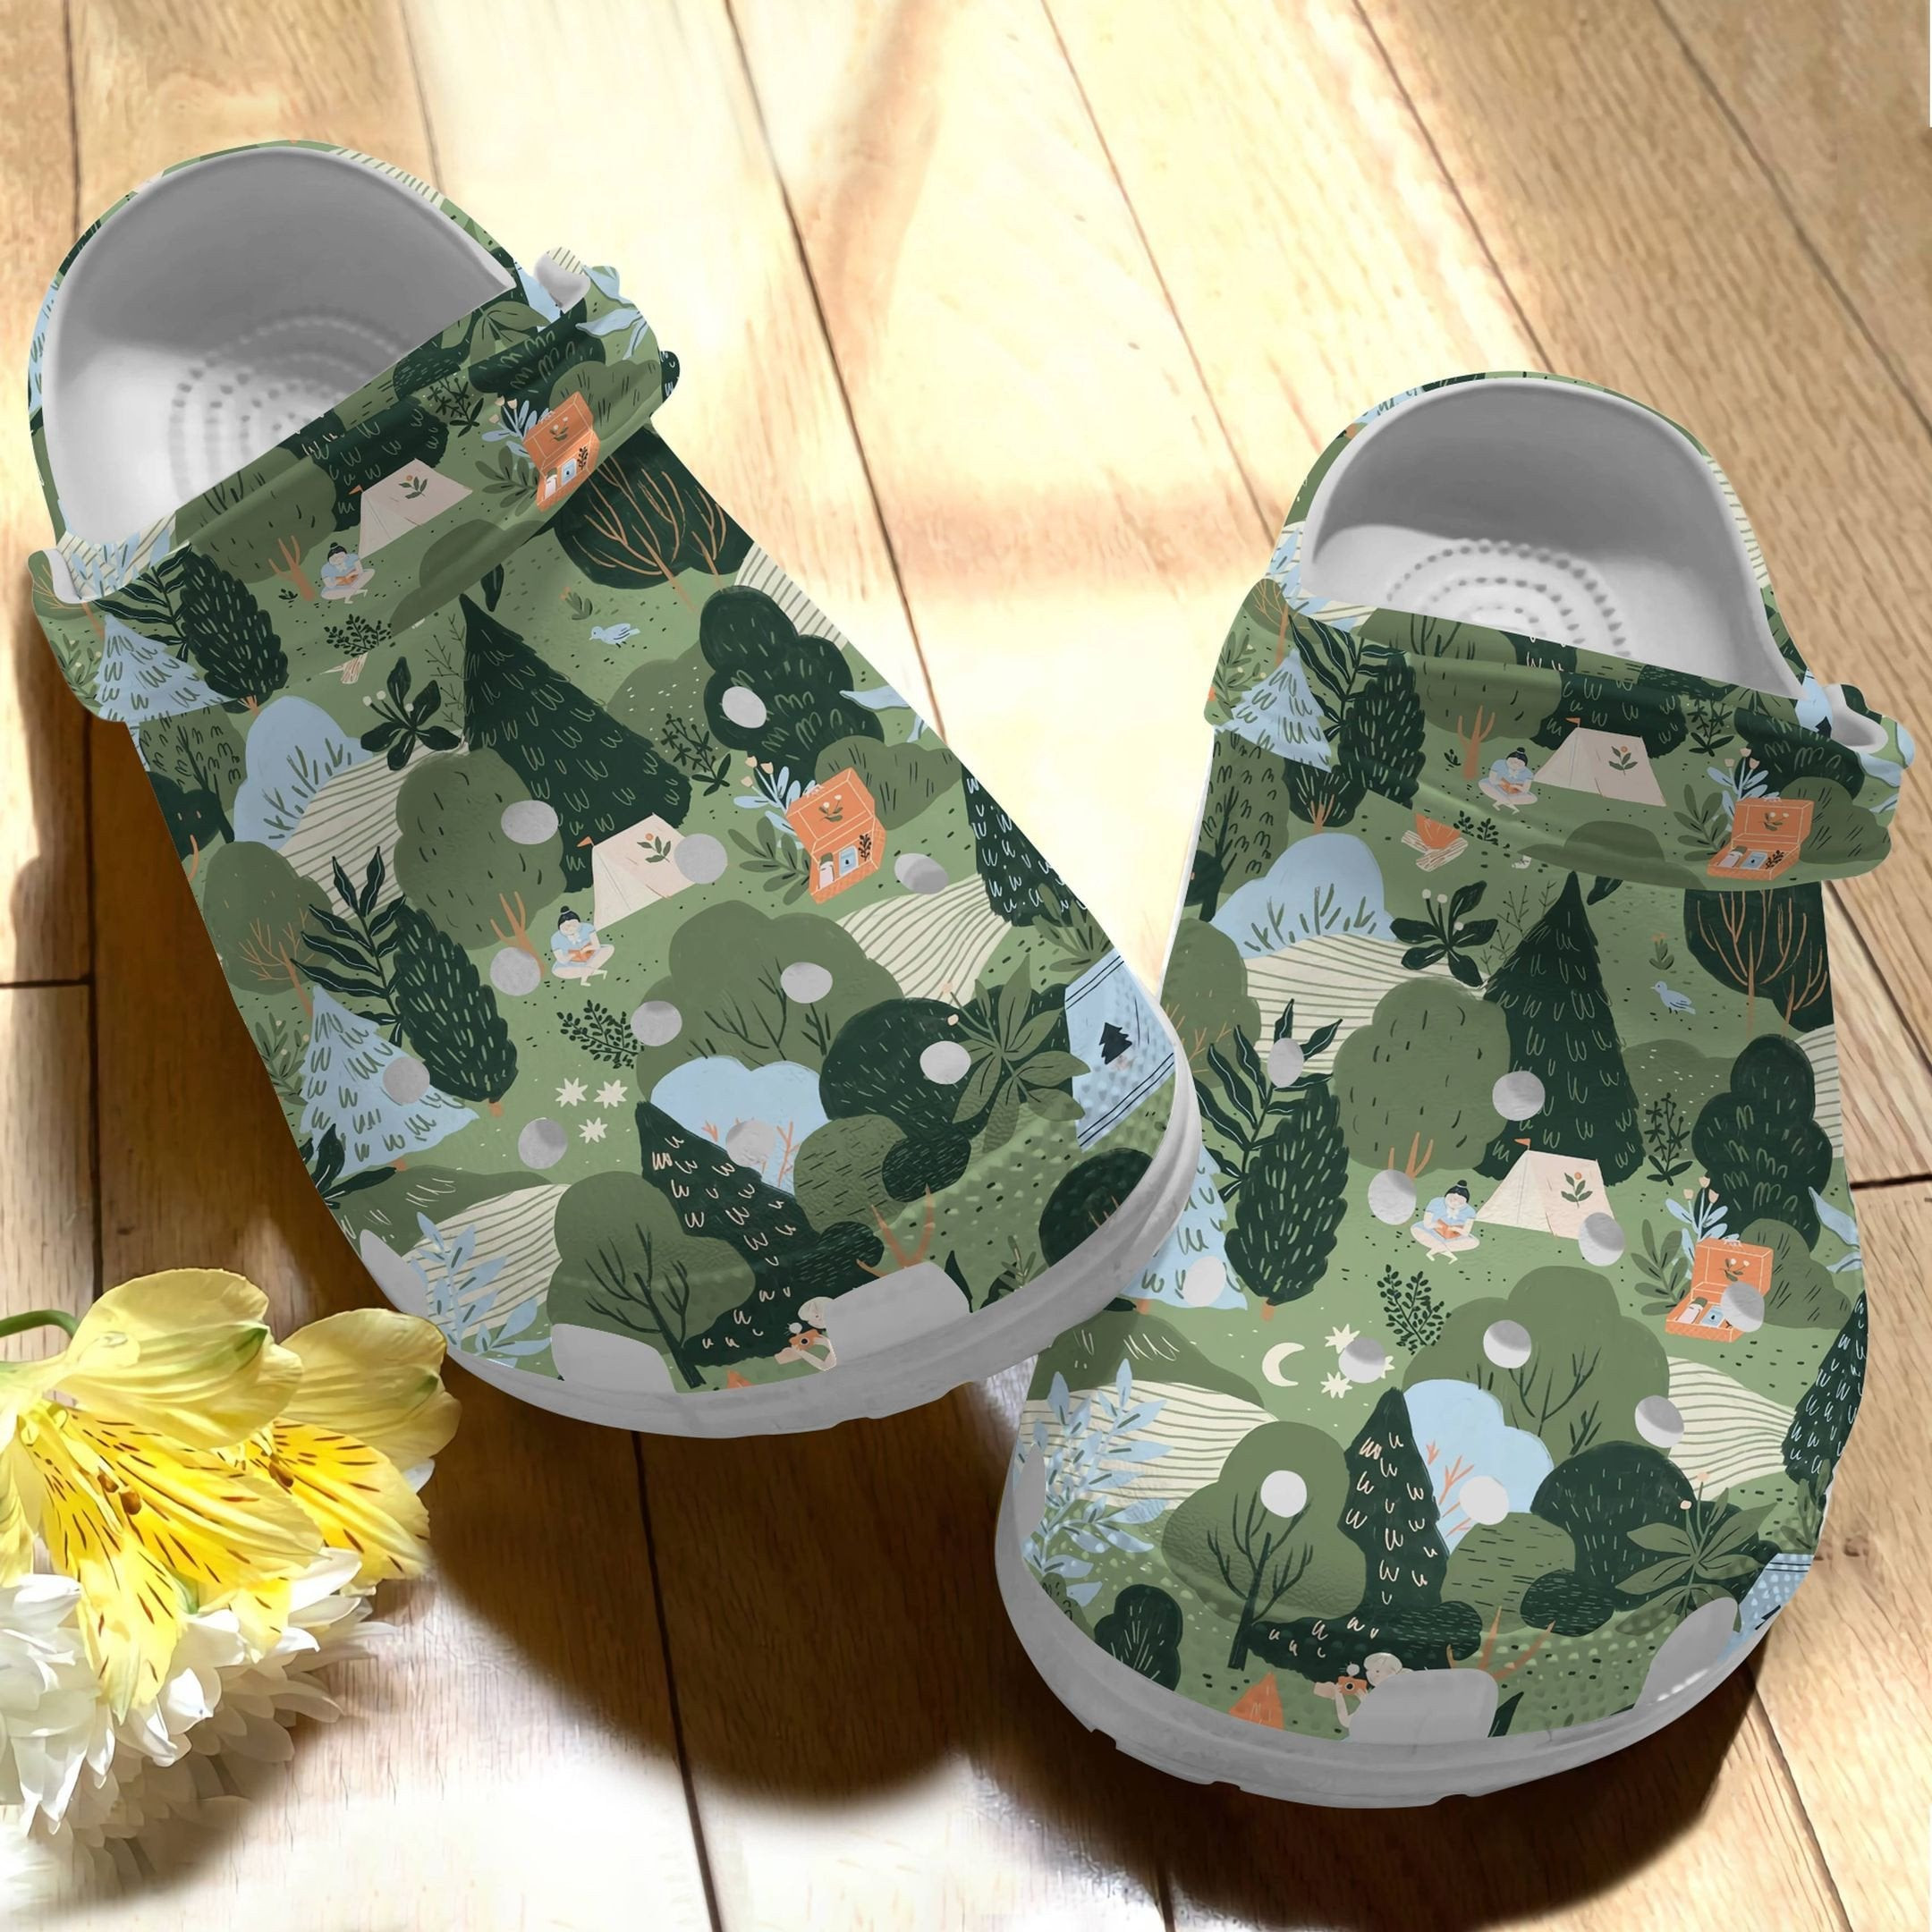 Camping Life Shoes - Camping Pattern Collection Crocs Clog Gift For Men Women Boy Girl